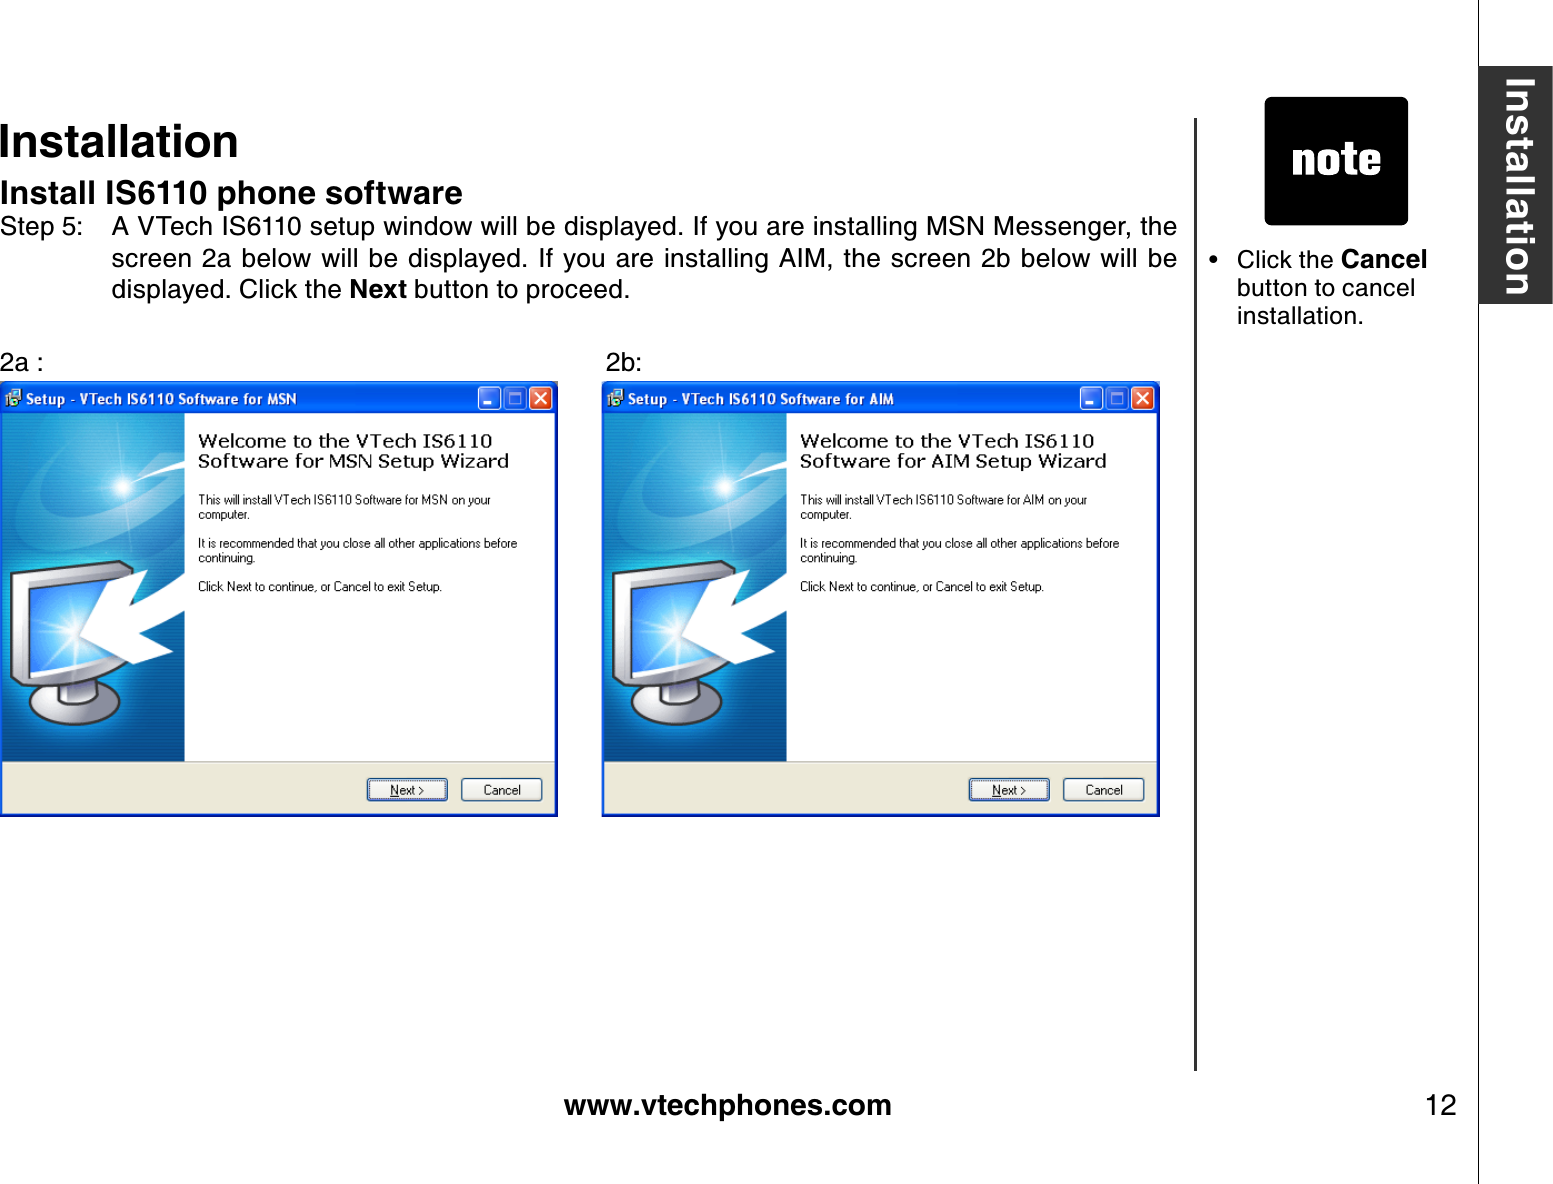 www.vtechphones.com 12InstallationInstallationInstall IS6110 phone softwareStep 5: A VTech IS6110 setup window will be displayed. If you are installing MSN Messenger, the screen 2a below will be displayed. If you are installing AIM, the screen 2b below will be displayed. Click the Nex t button to proceed.2a :           2b:         Click the Cancel button to cancel installation. •